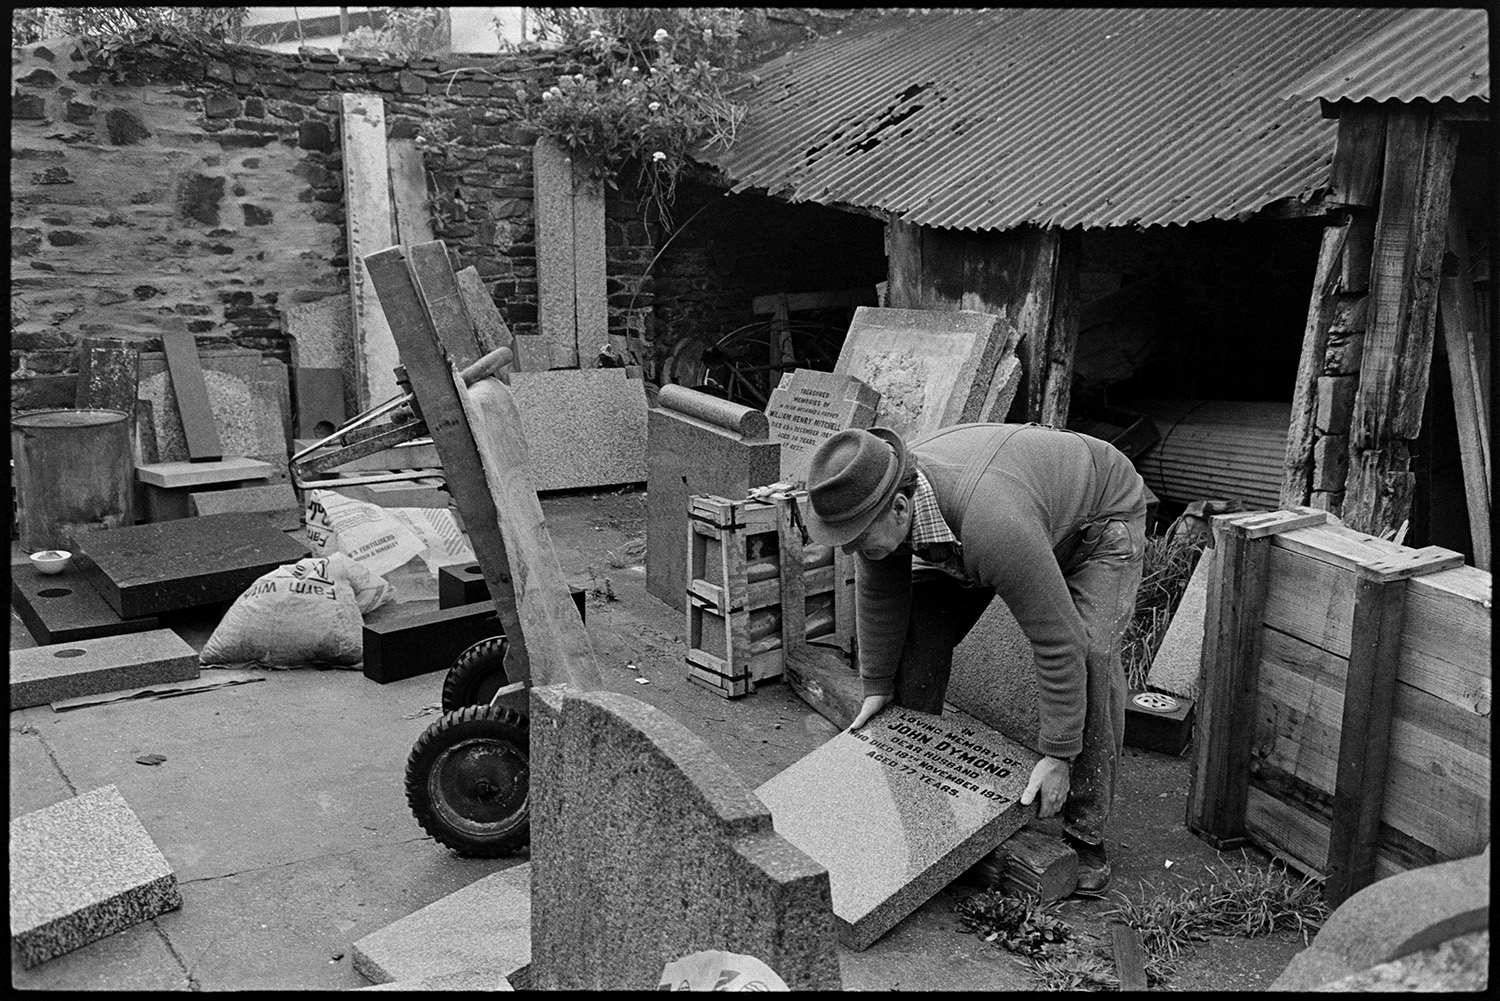 Monumental mason at work on headstone in workshop and loading stone into car. 
[Bruce Edyvean, a monumental mason, lifting a headstone for a grave onto a sack truck in the yard outside his workshop at New Street, Torrington. Other gravestones are visible in the yard.]